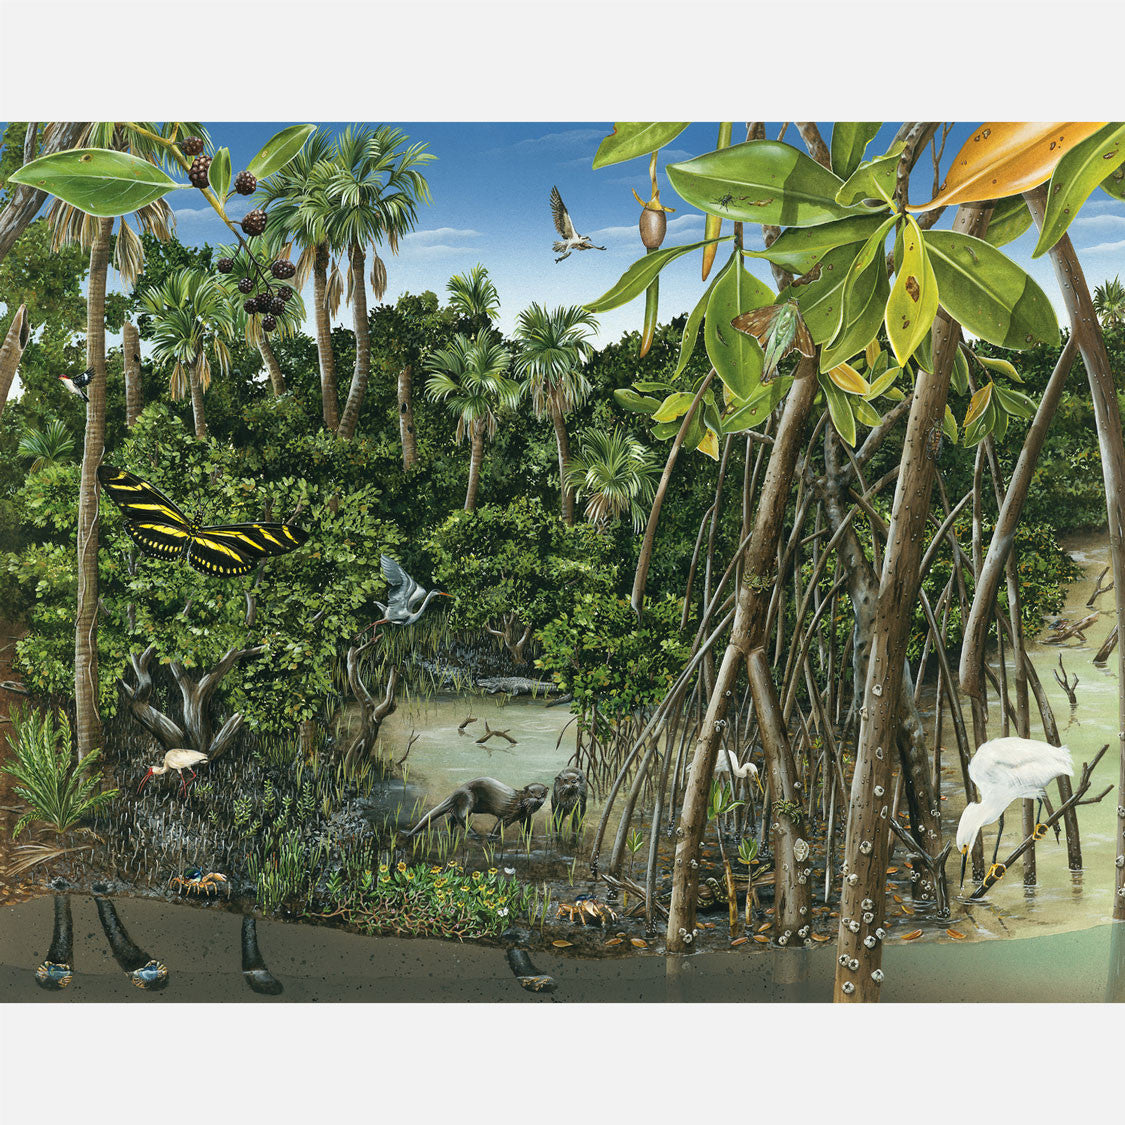 This illustration depicts an intertidal lagoon of southeast Florida. The art features mangroves, a river otter, a snowy egret, and several other plants and animals associated with the lagoon.